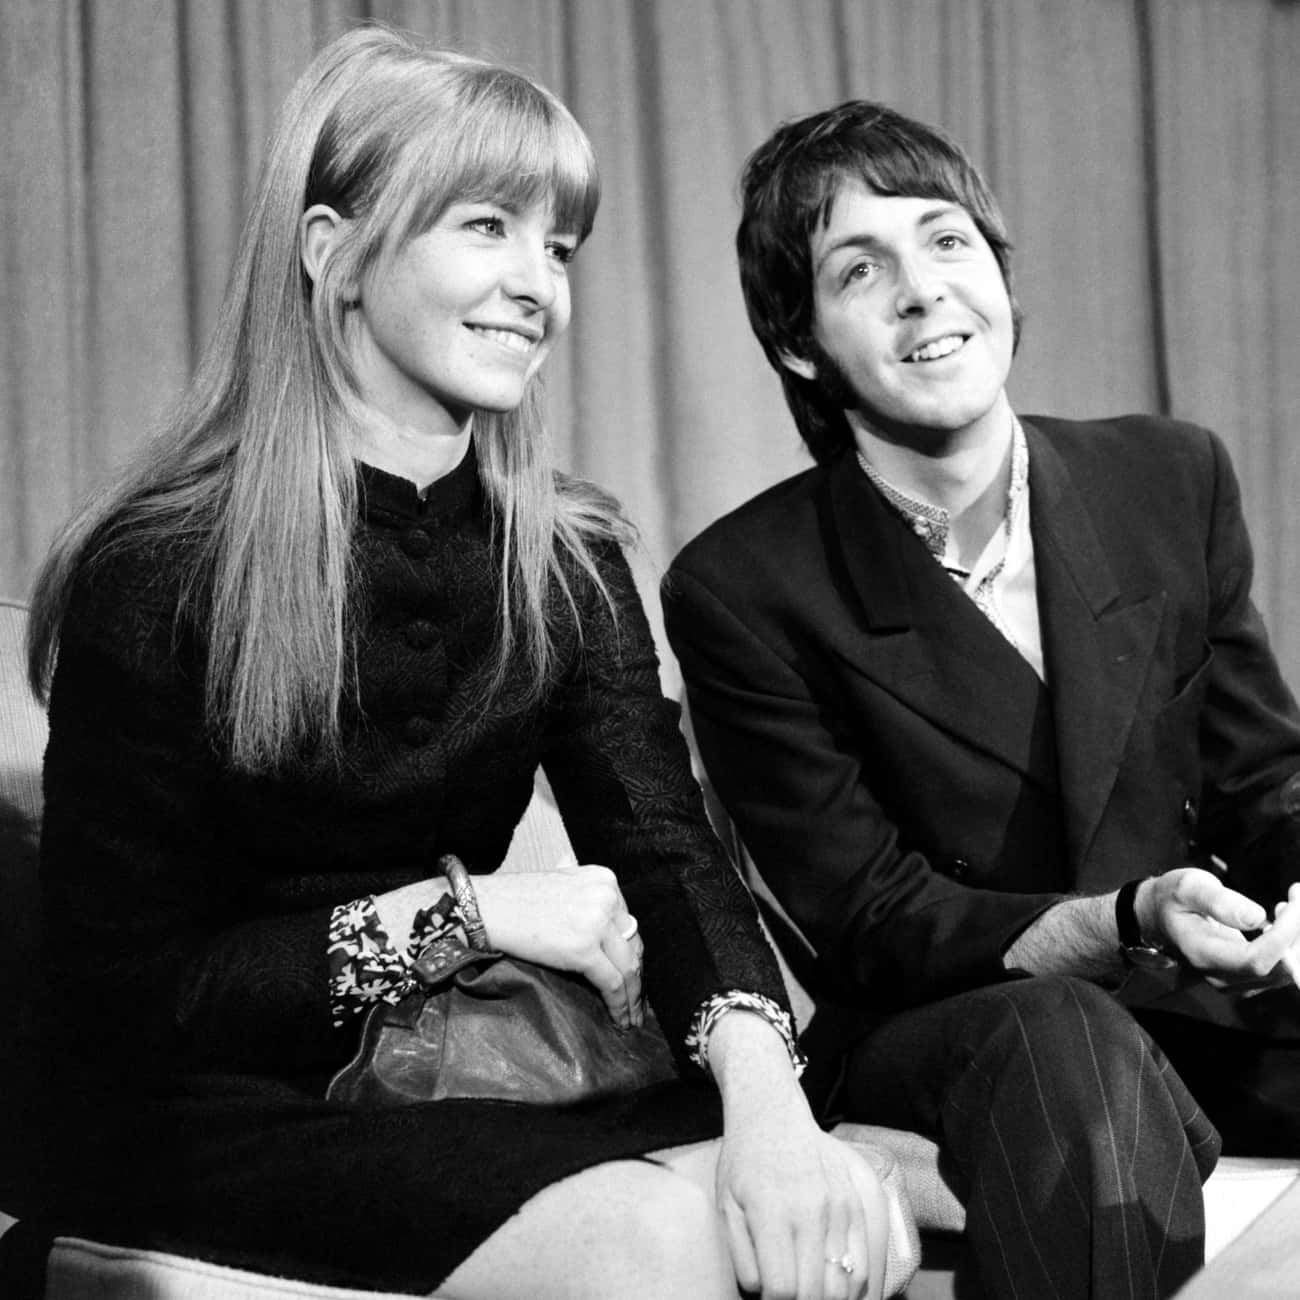 Paul McCartney's Wives & Relationship History